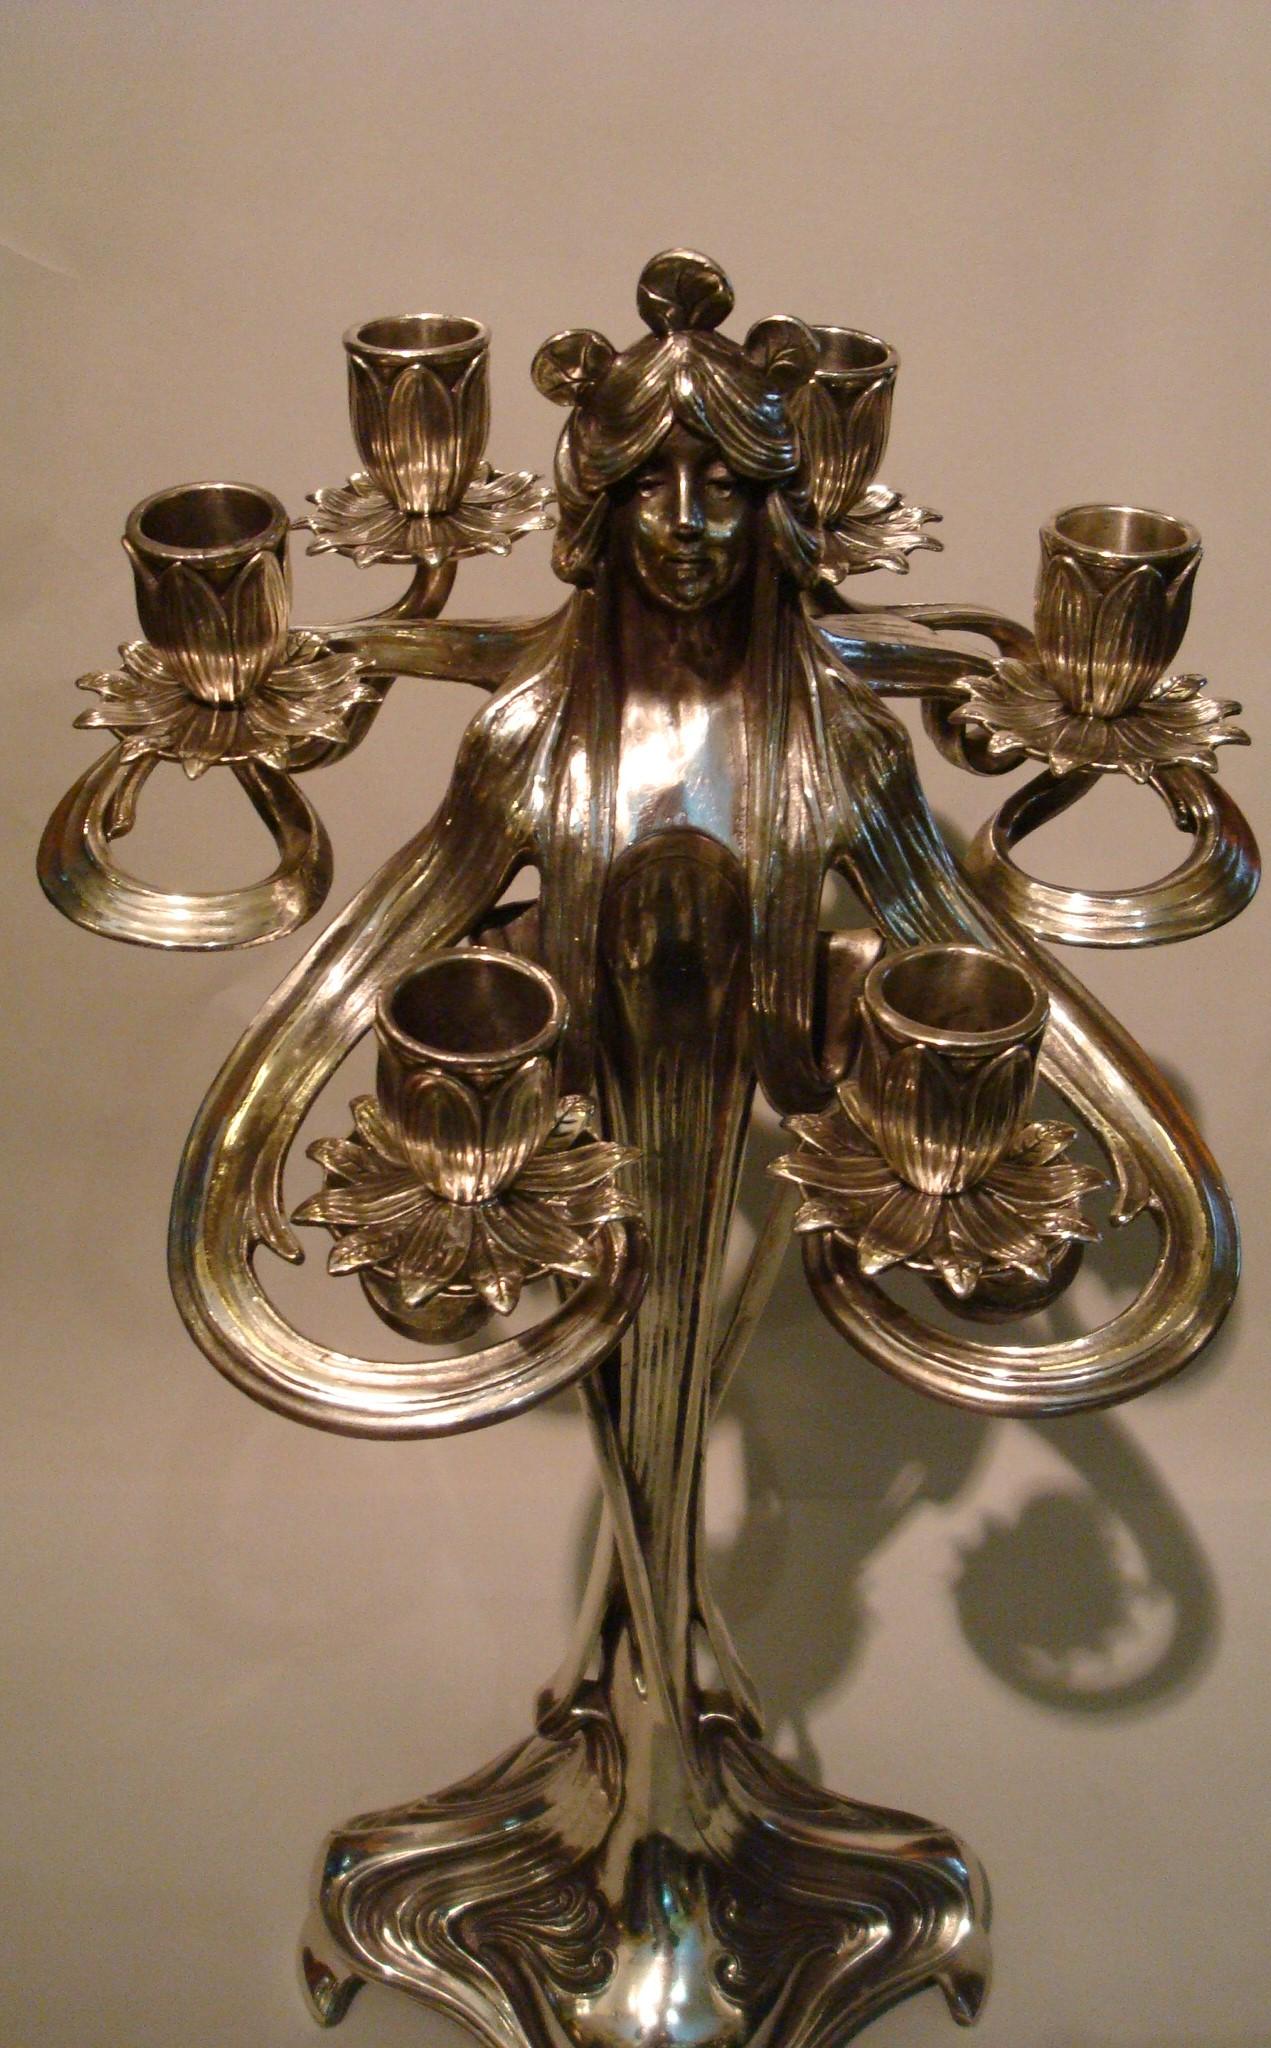 Art Nouveau silvered Pewter Candelabra a pair
Pair of Art Nouveau silvered pewter candelabra / candleholder
with female figure surrounded by 6 arms for six candles (probably WMF) 
Each cast in the form of a longhaired female form who seemingly